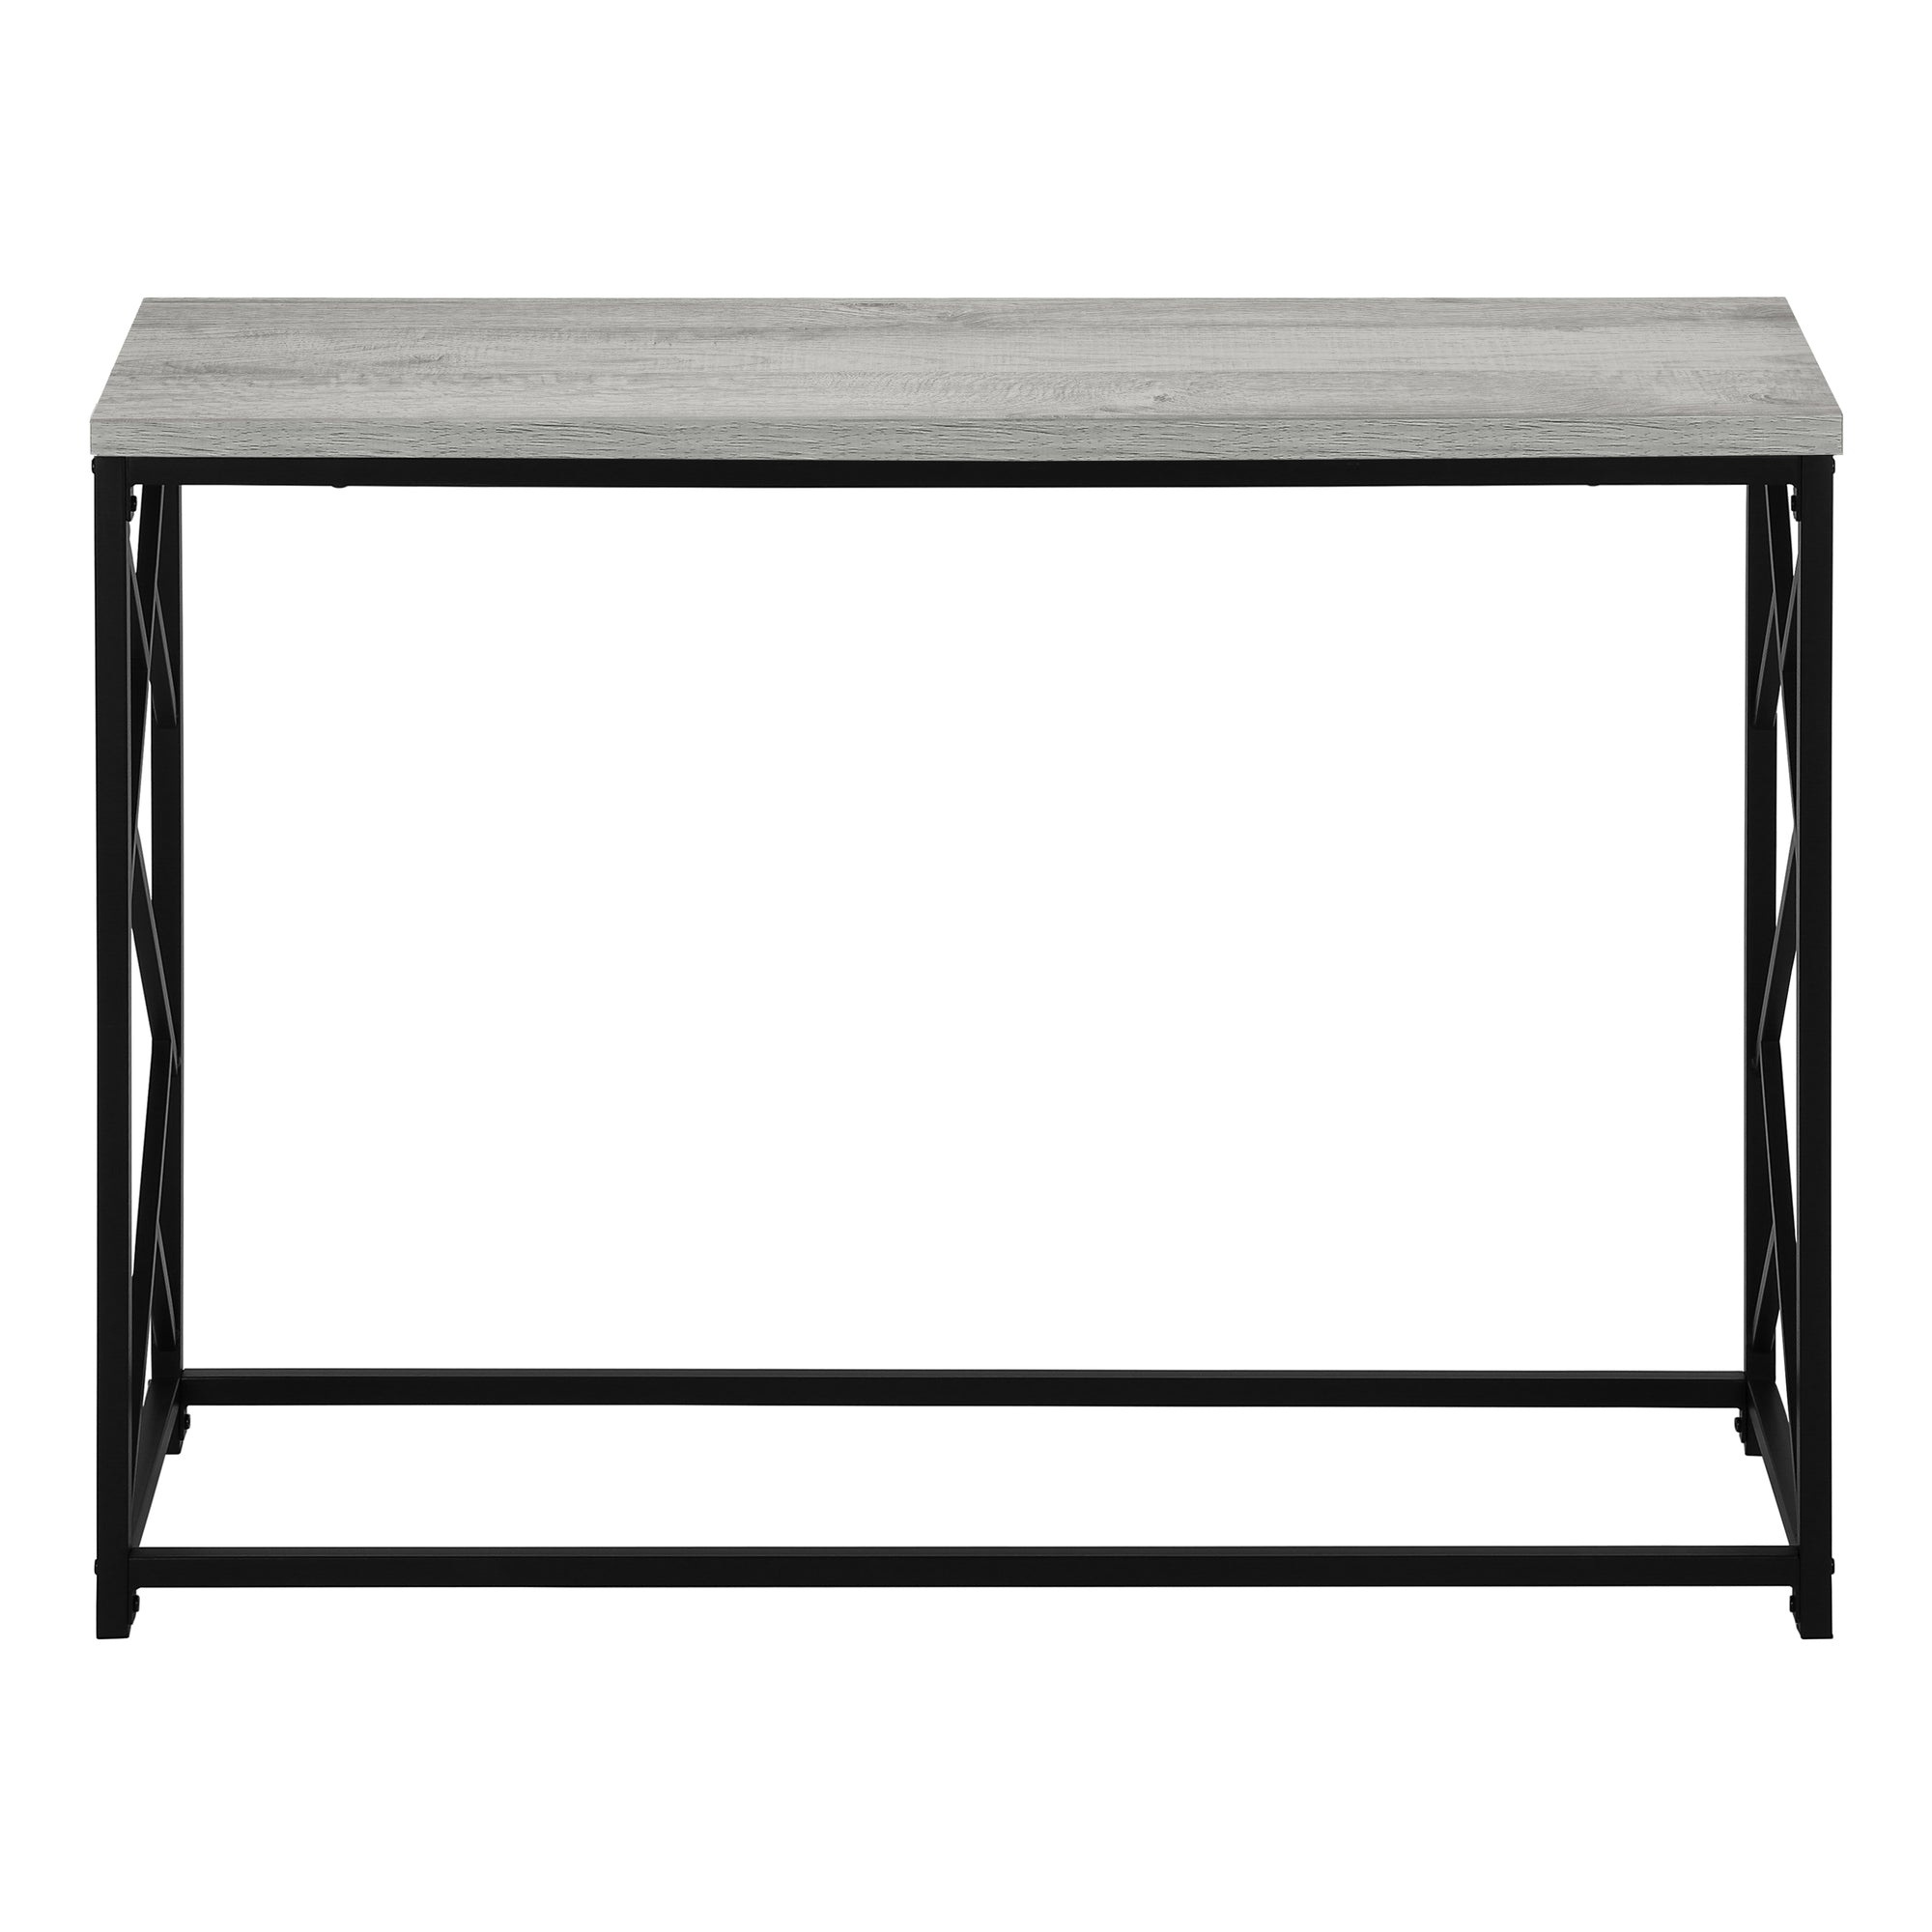 Accent Table - 44L / Grey / Black Metal Hall Console